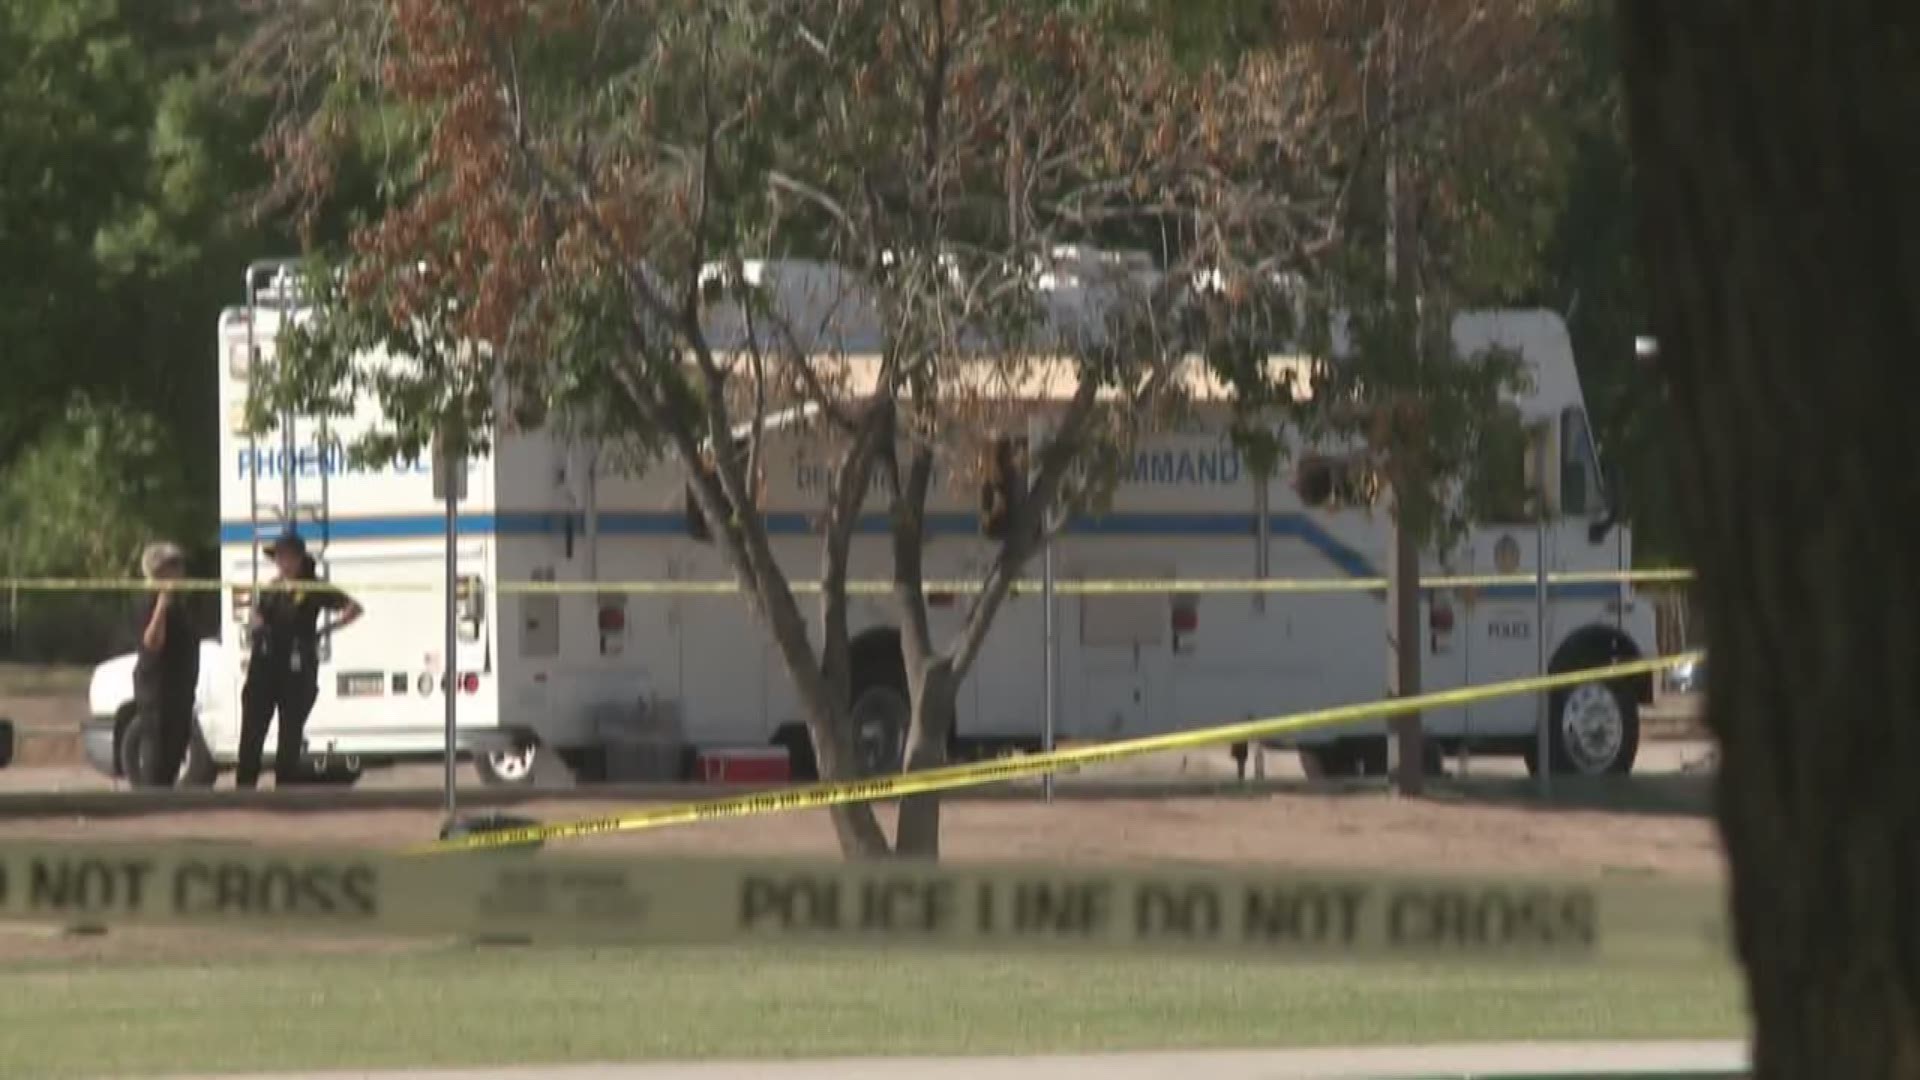 Phoenix police are investigating the deaths of two people who were found at El Prado Park.